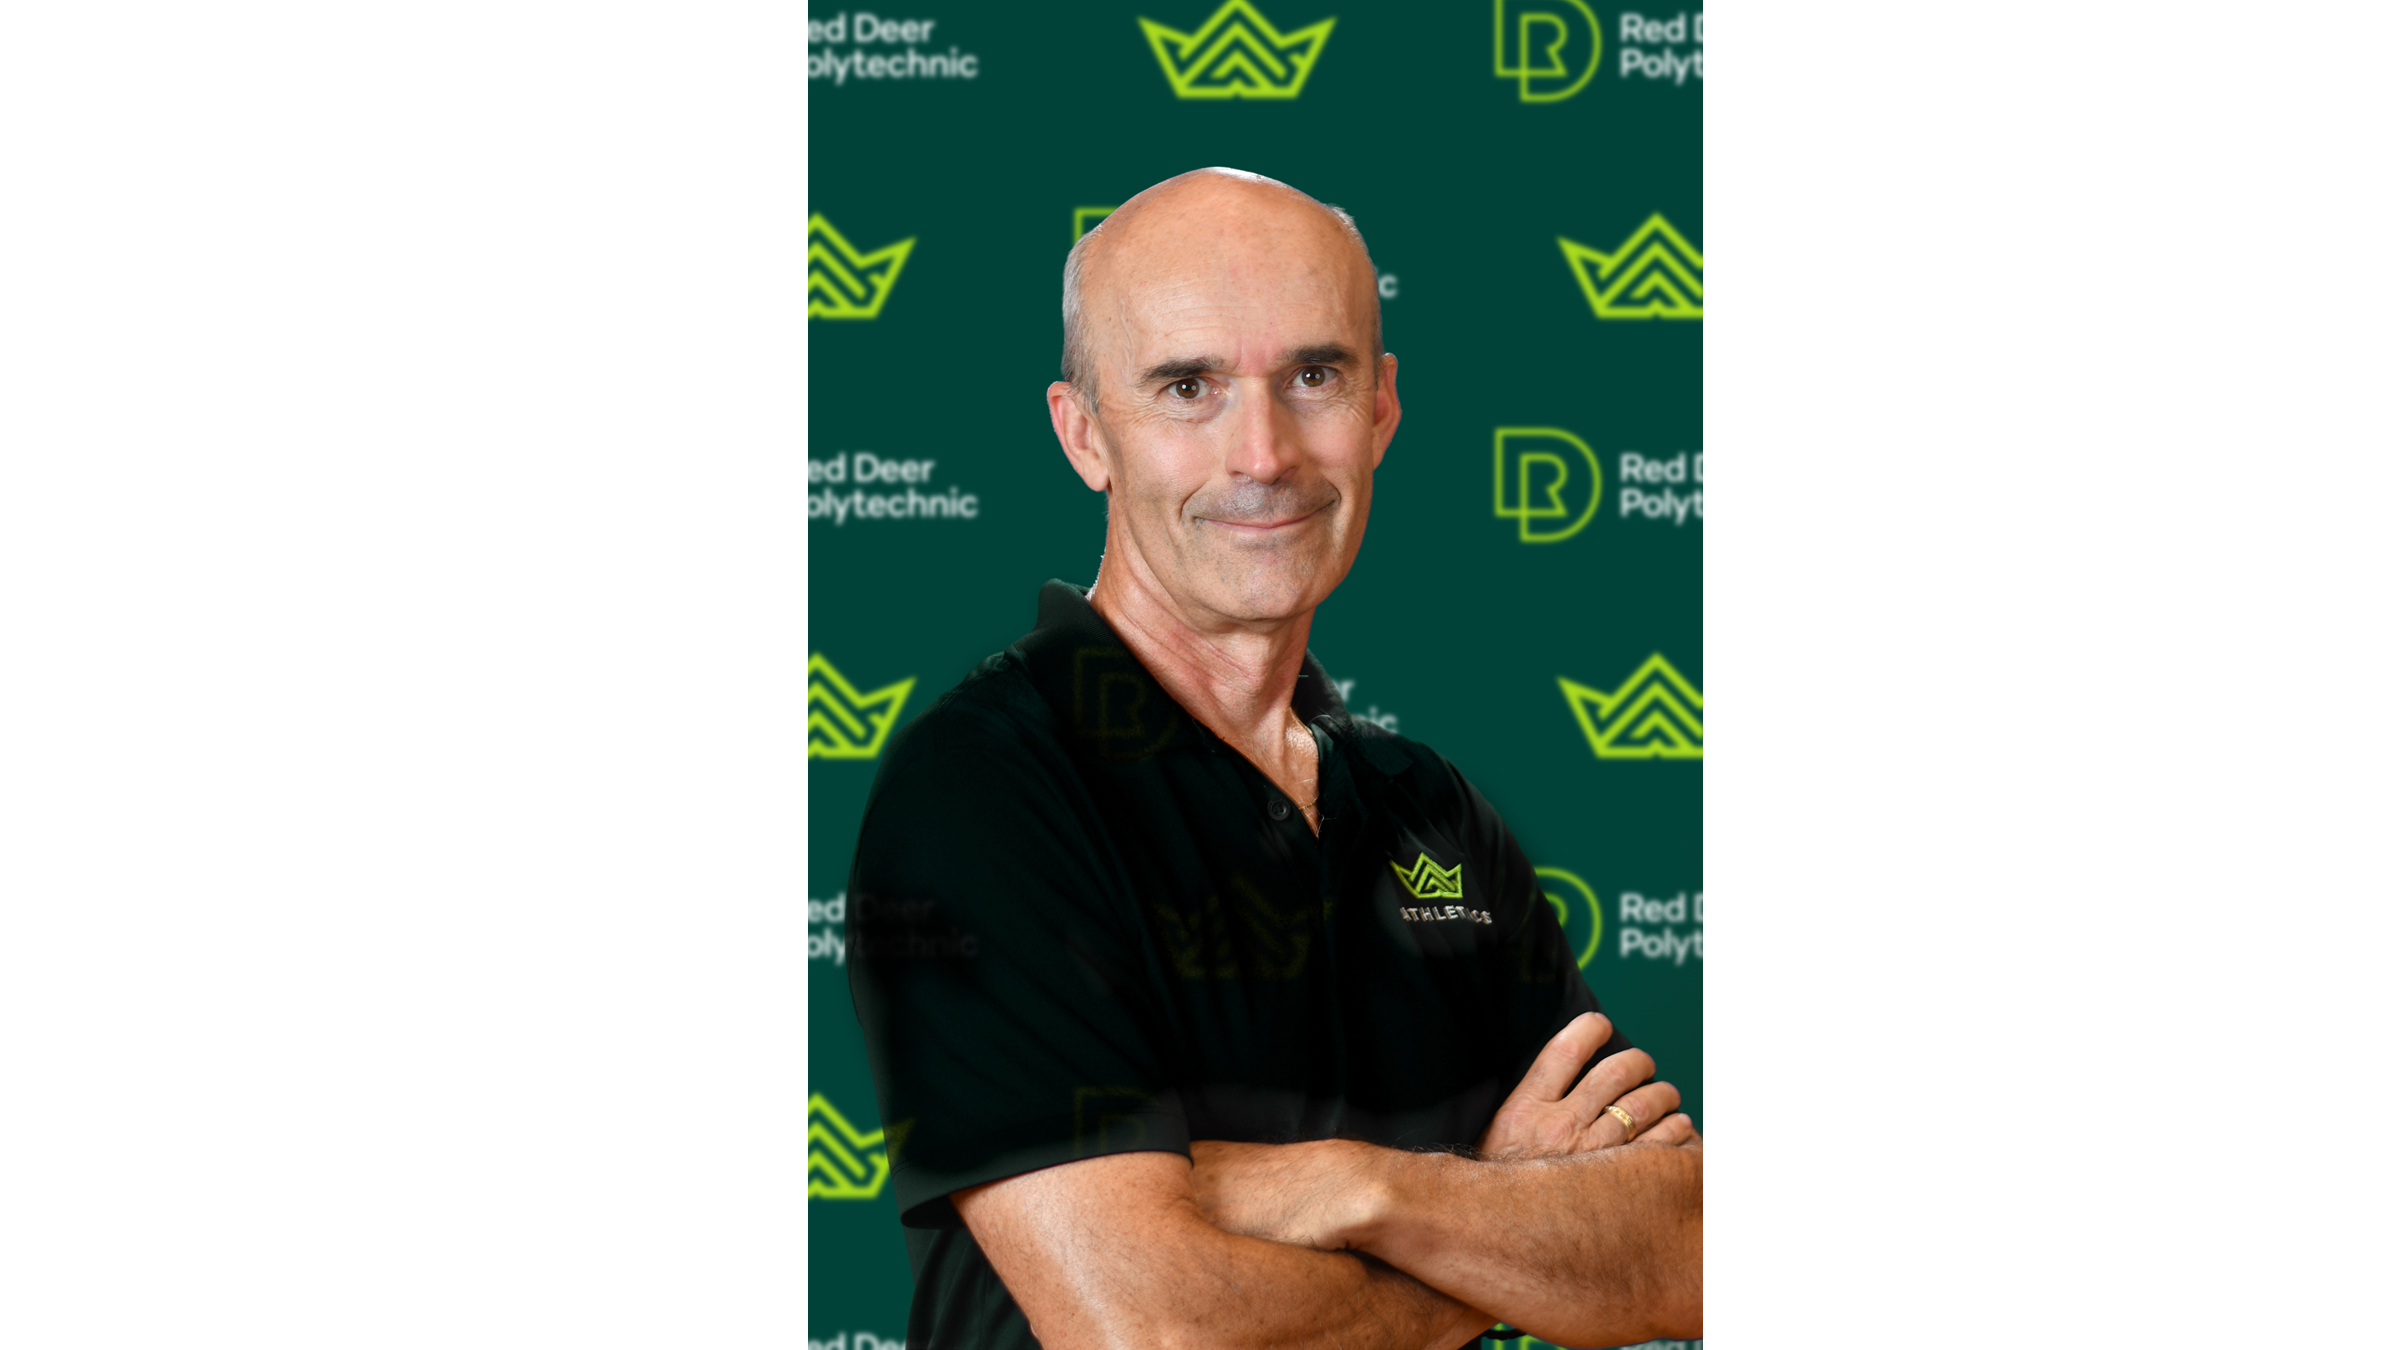 Red Deer Polytechnic Athletics announces new Cross Country Running/Indoor Track Head Coach